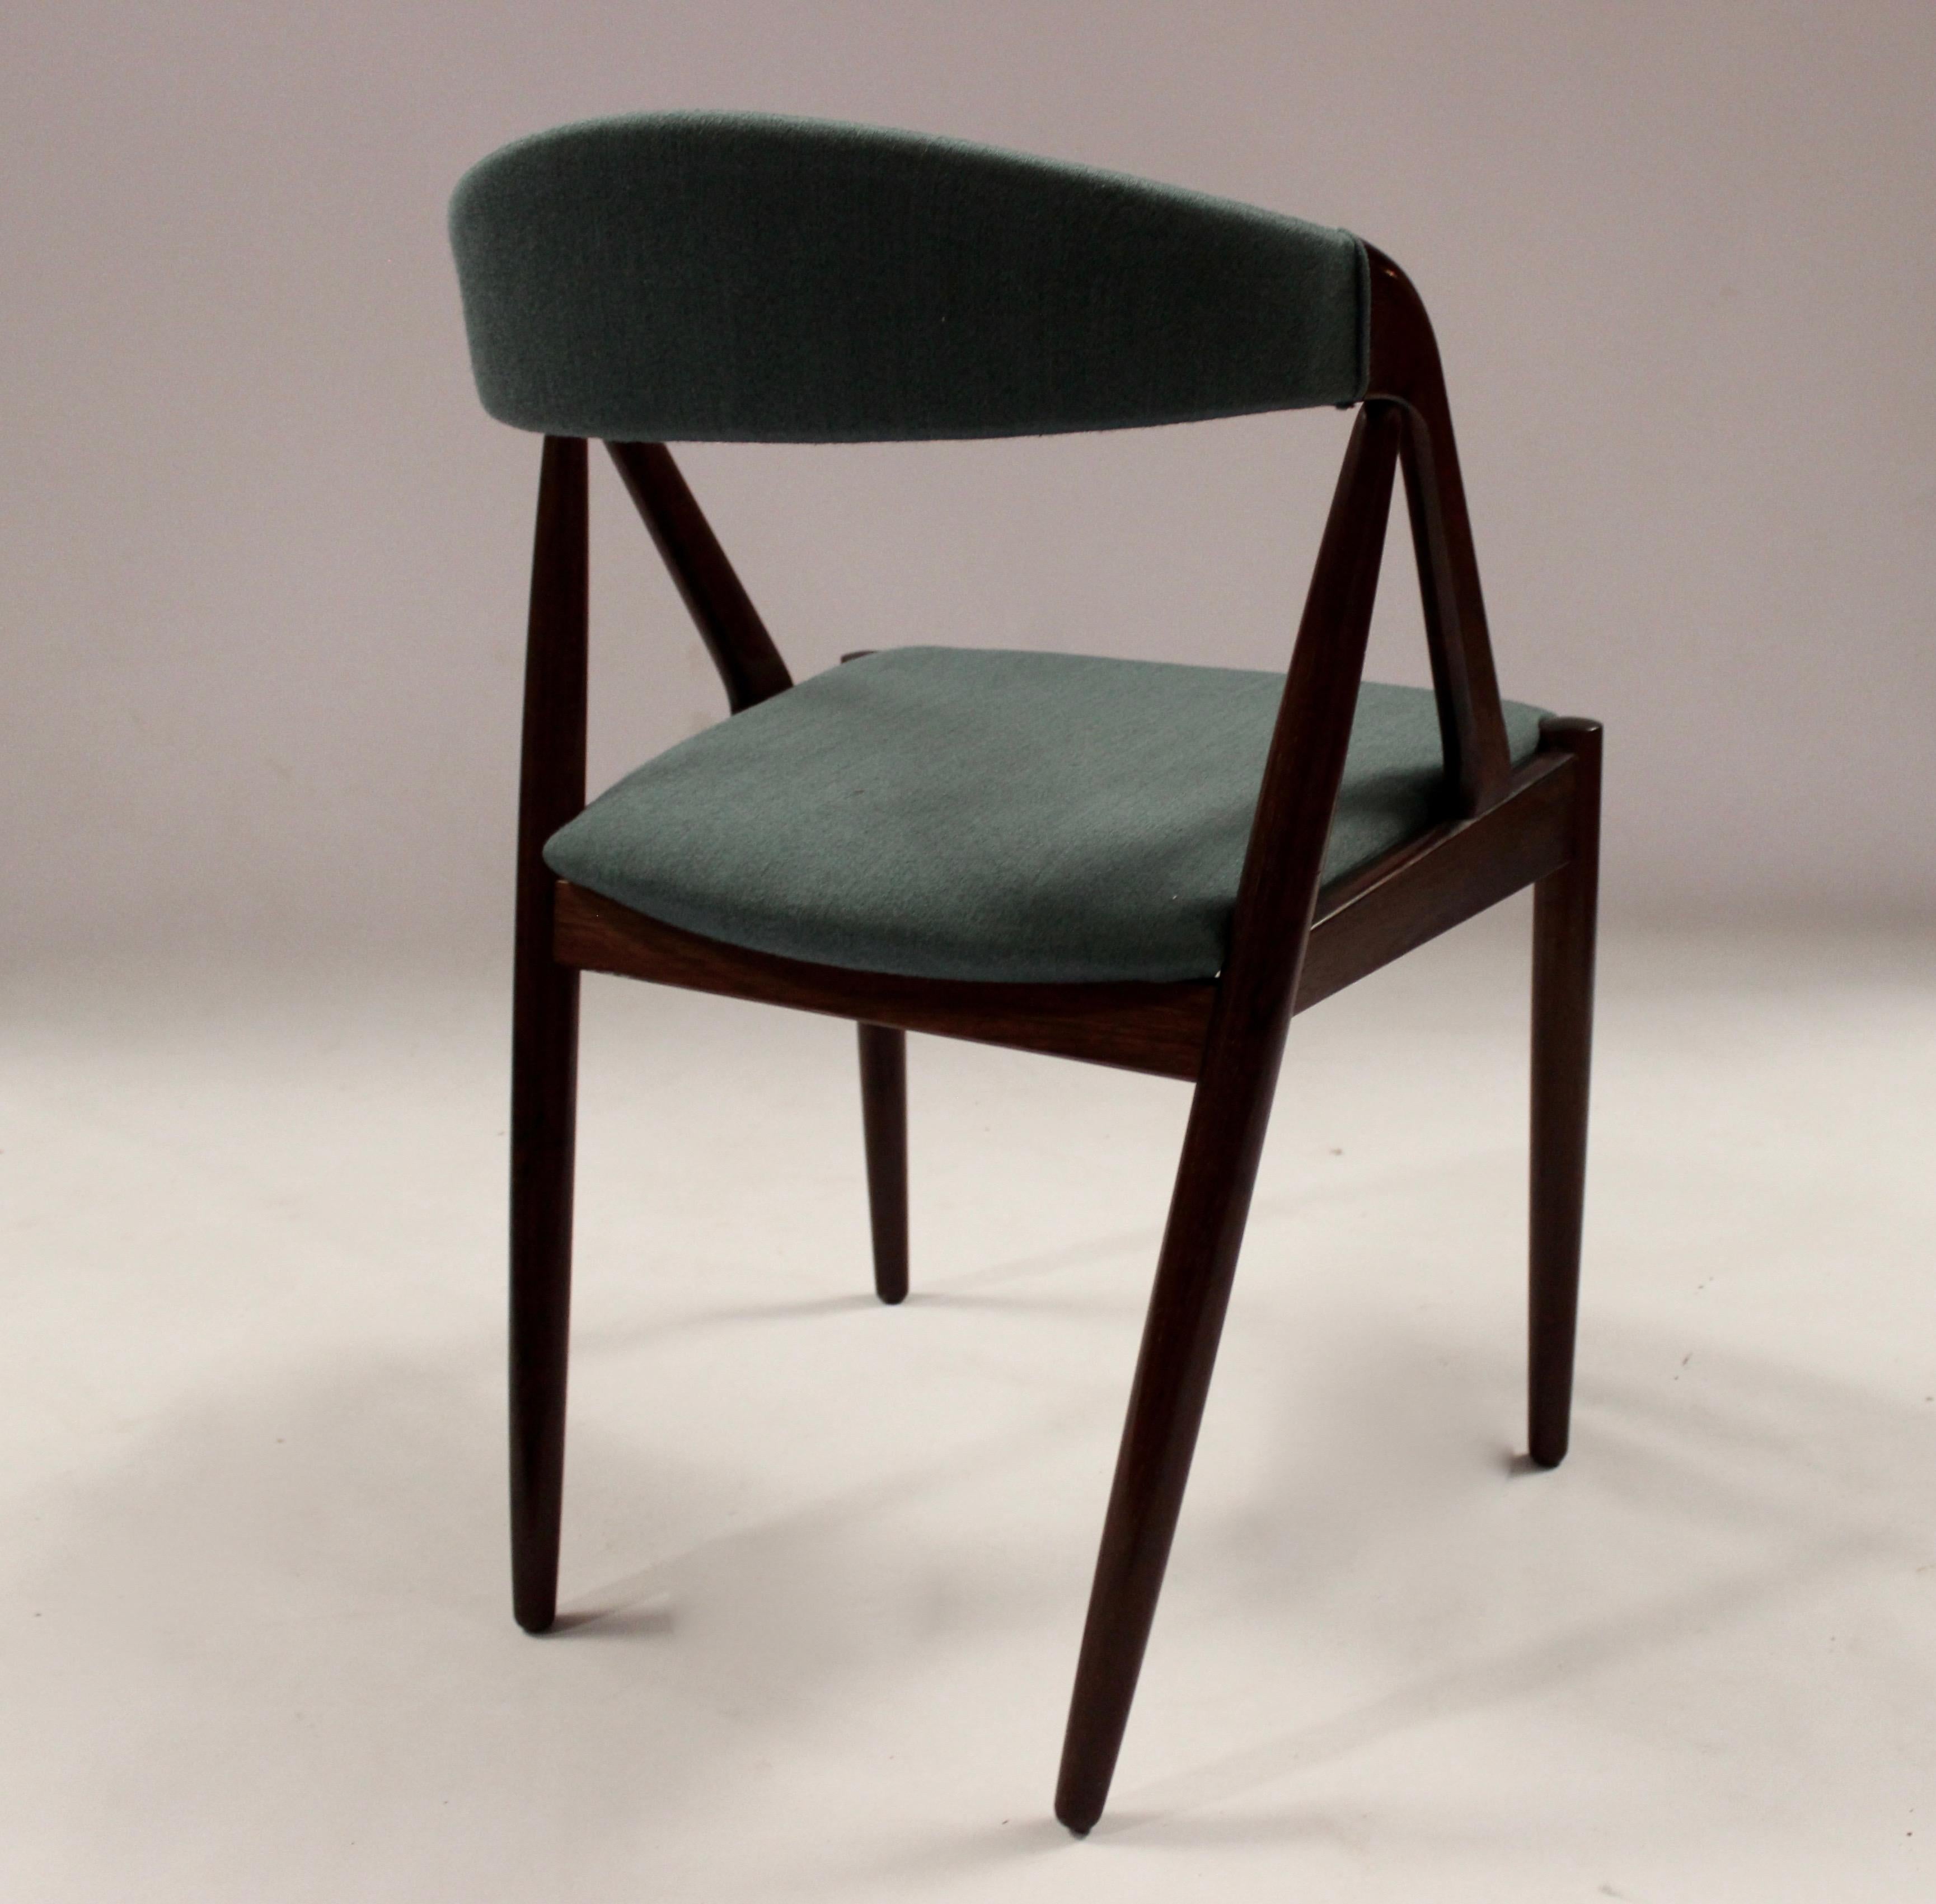 Danish Set of Four Chairs, Model 31, by Kai Kristiansen and Schou Andersen, 1960s